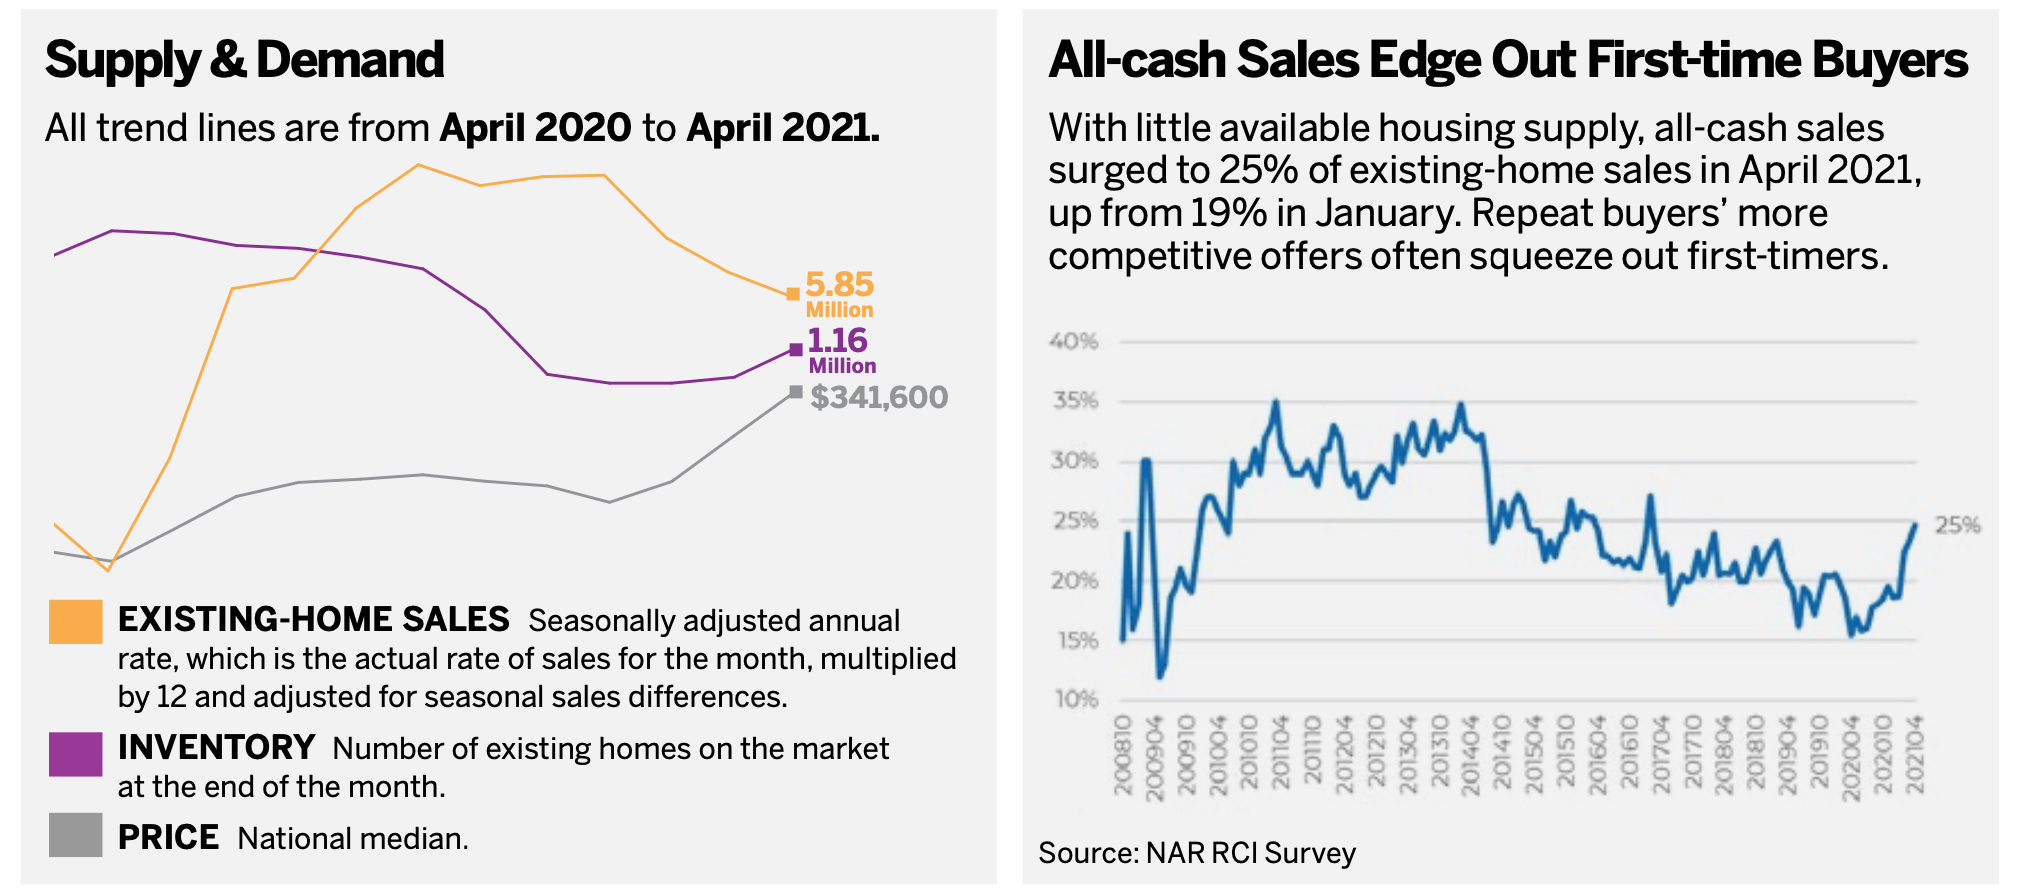 Supply & Demand/All-cash Sales Edge Out First-time Buyers